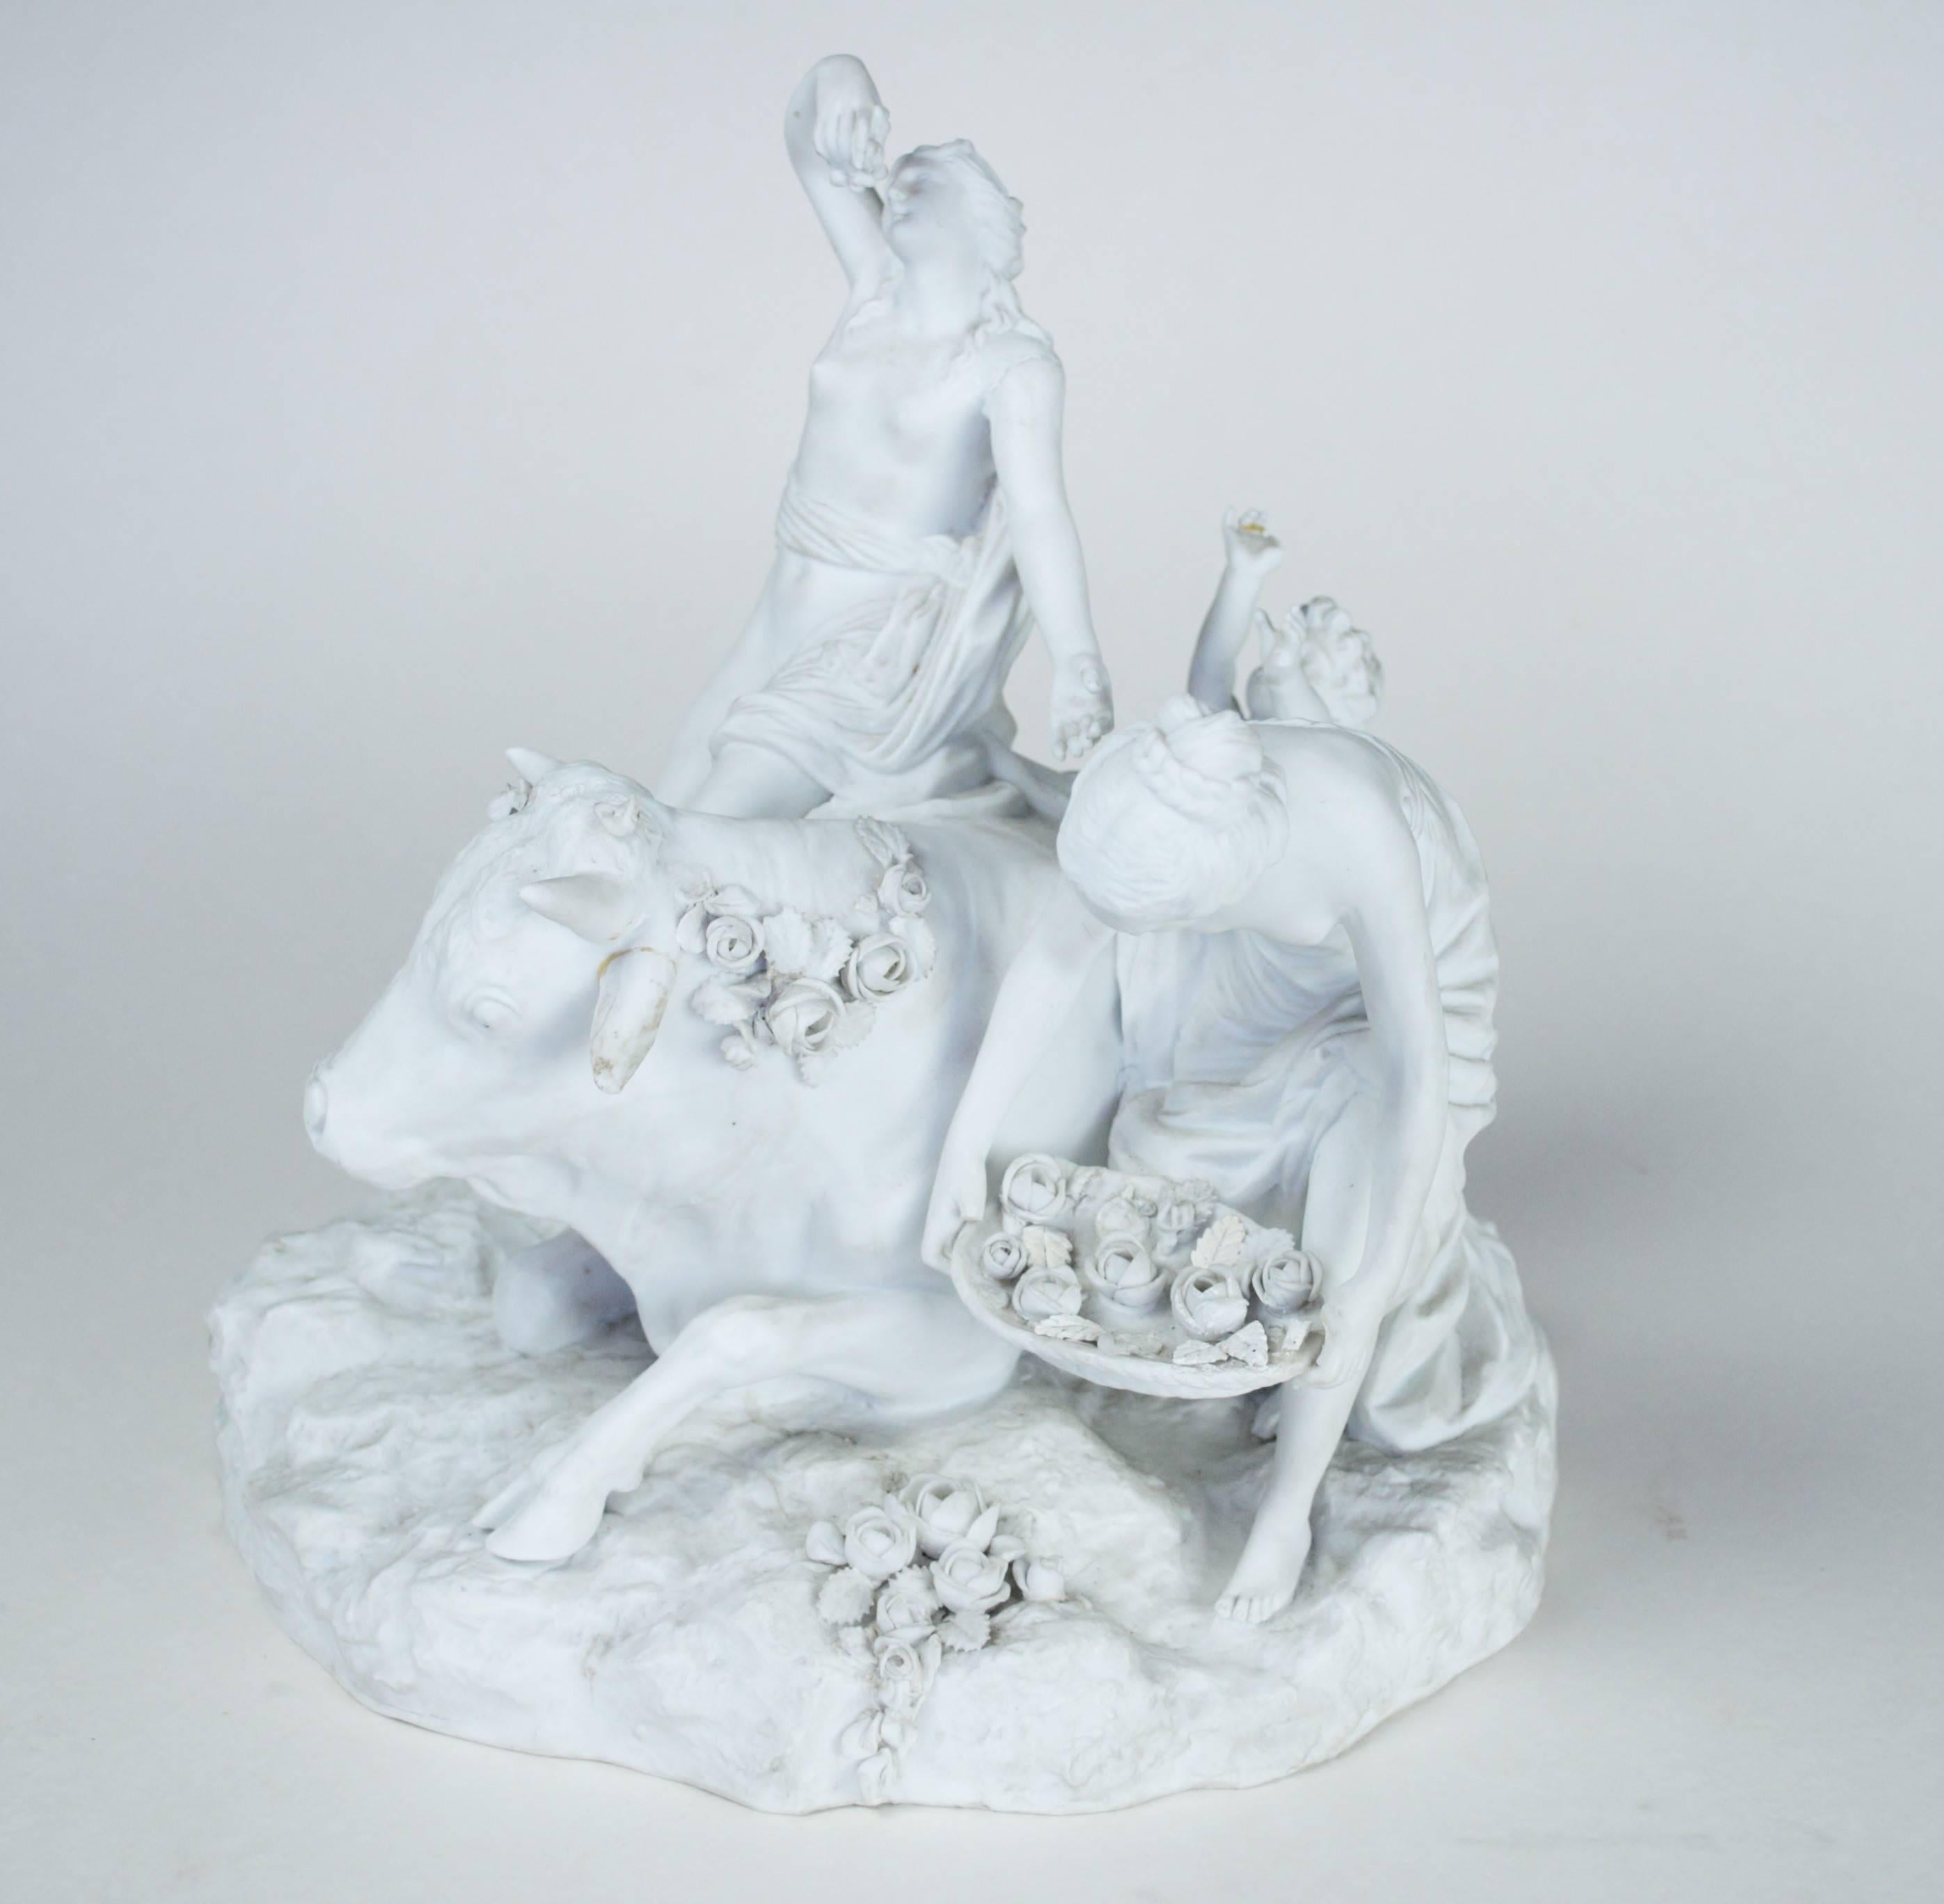 A mid-19th century, Parian-ware group figure depicting The abduction of Europa by Zeus as a white Bull. 

Europa was the beautiful daughter of the Phoenician king of Tyre, Agenor. 

Zeus, the King of the gods according to Greek mythology, saw